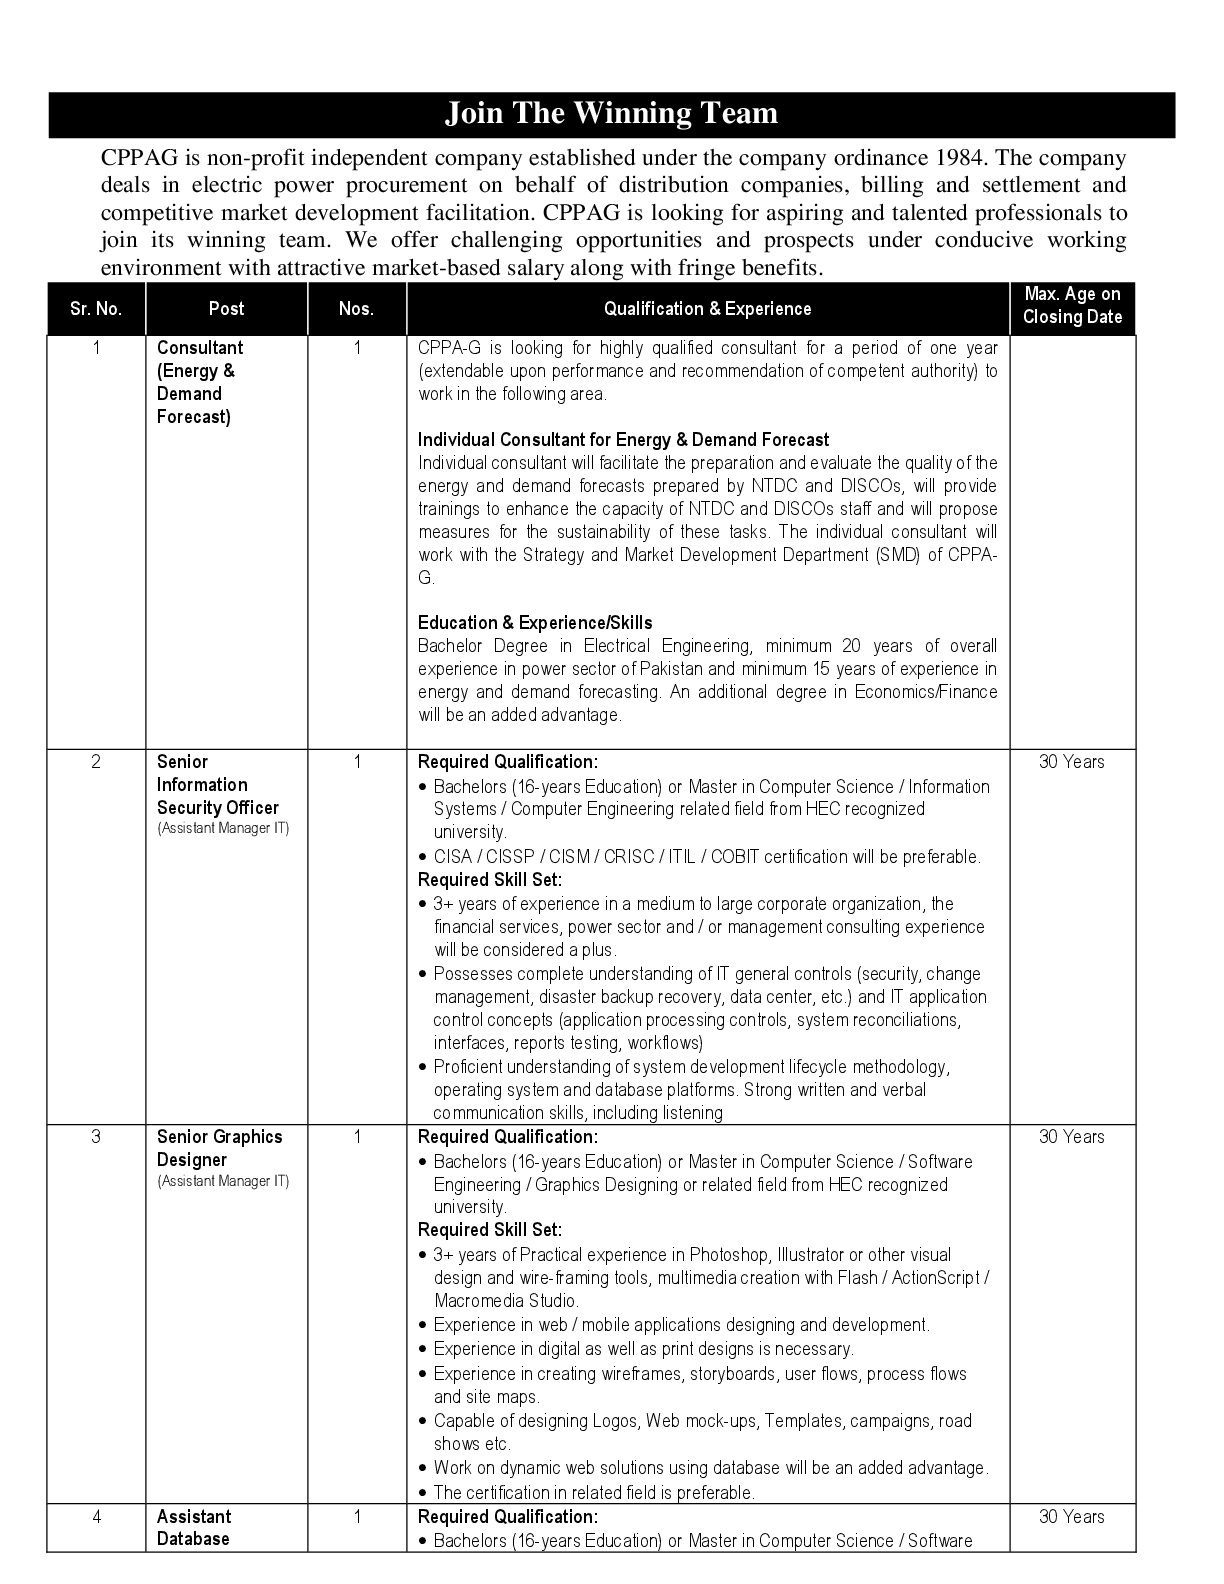 PTS Central Powar Purchasing Agency CPPA Jobs 2018